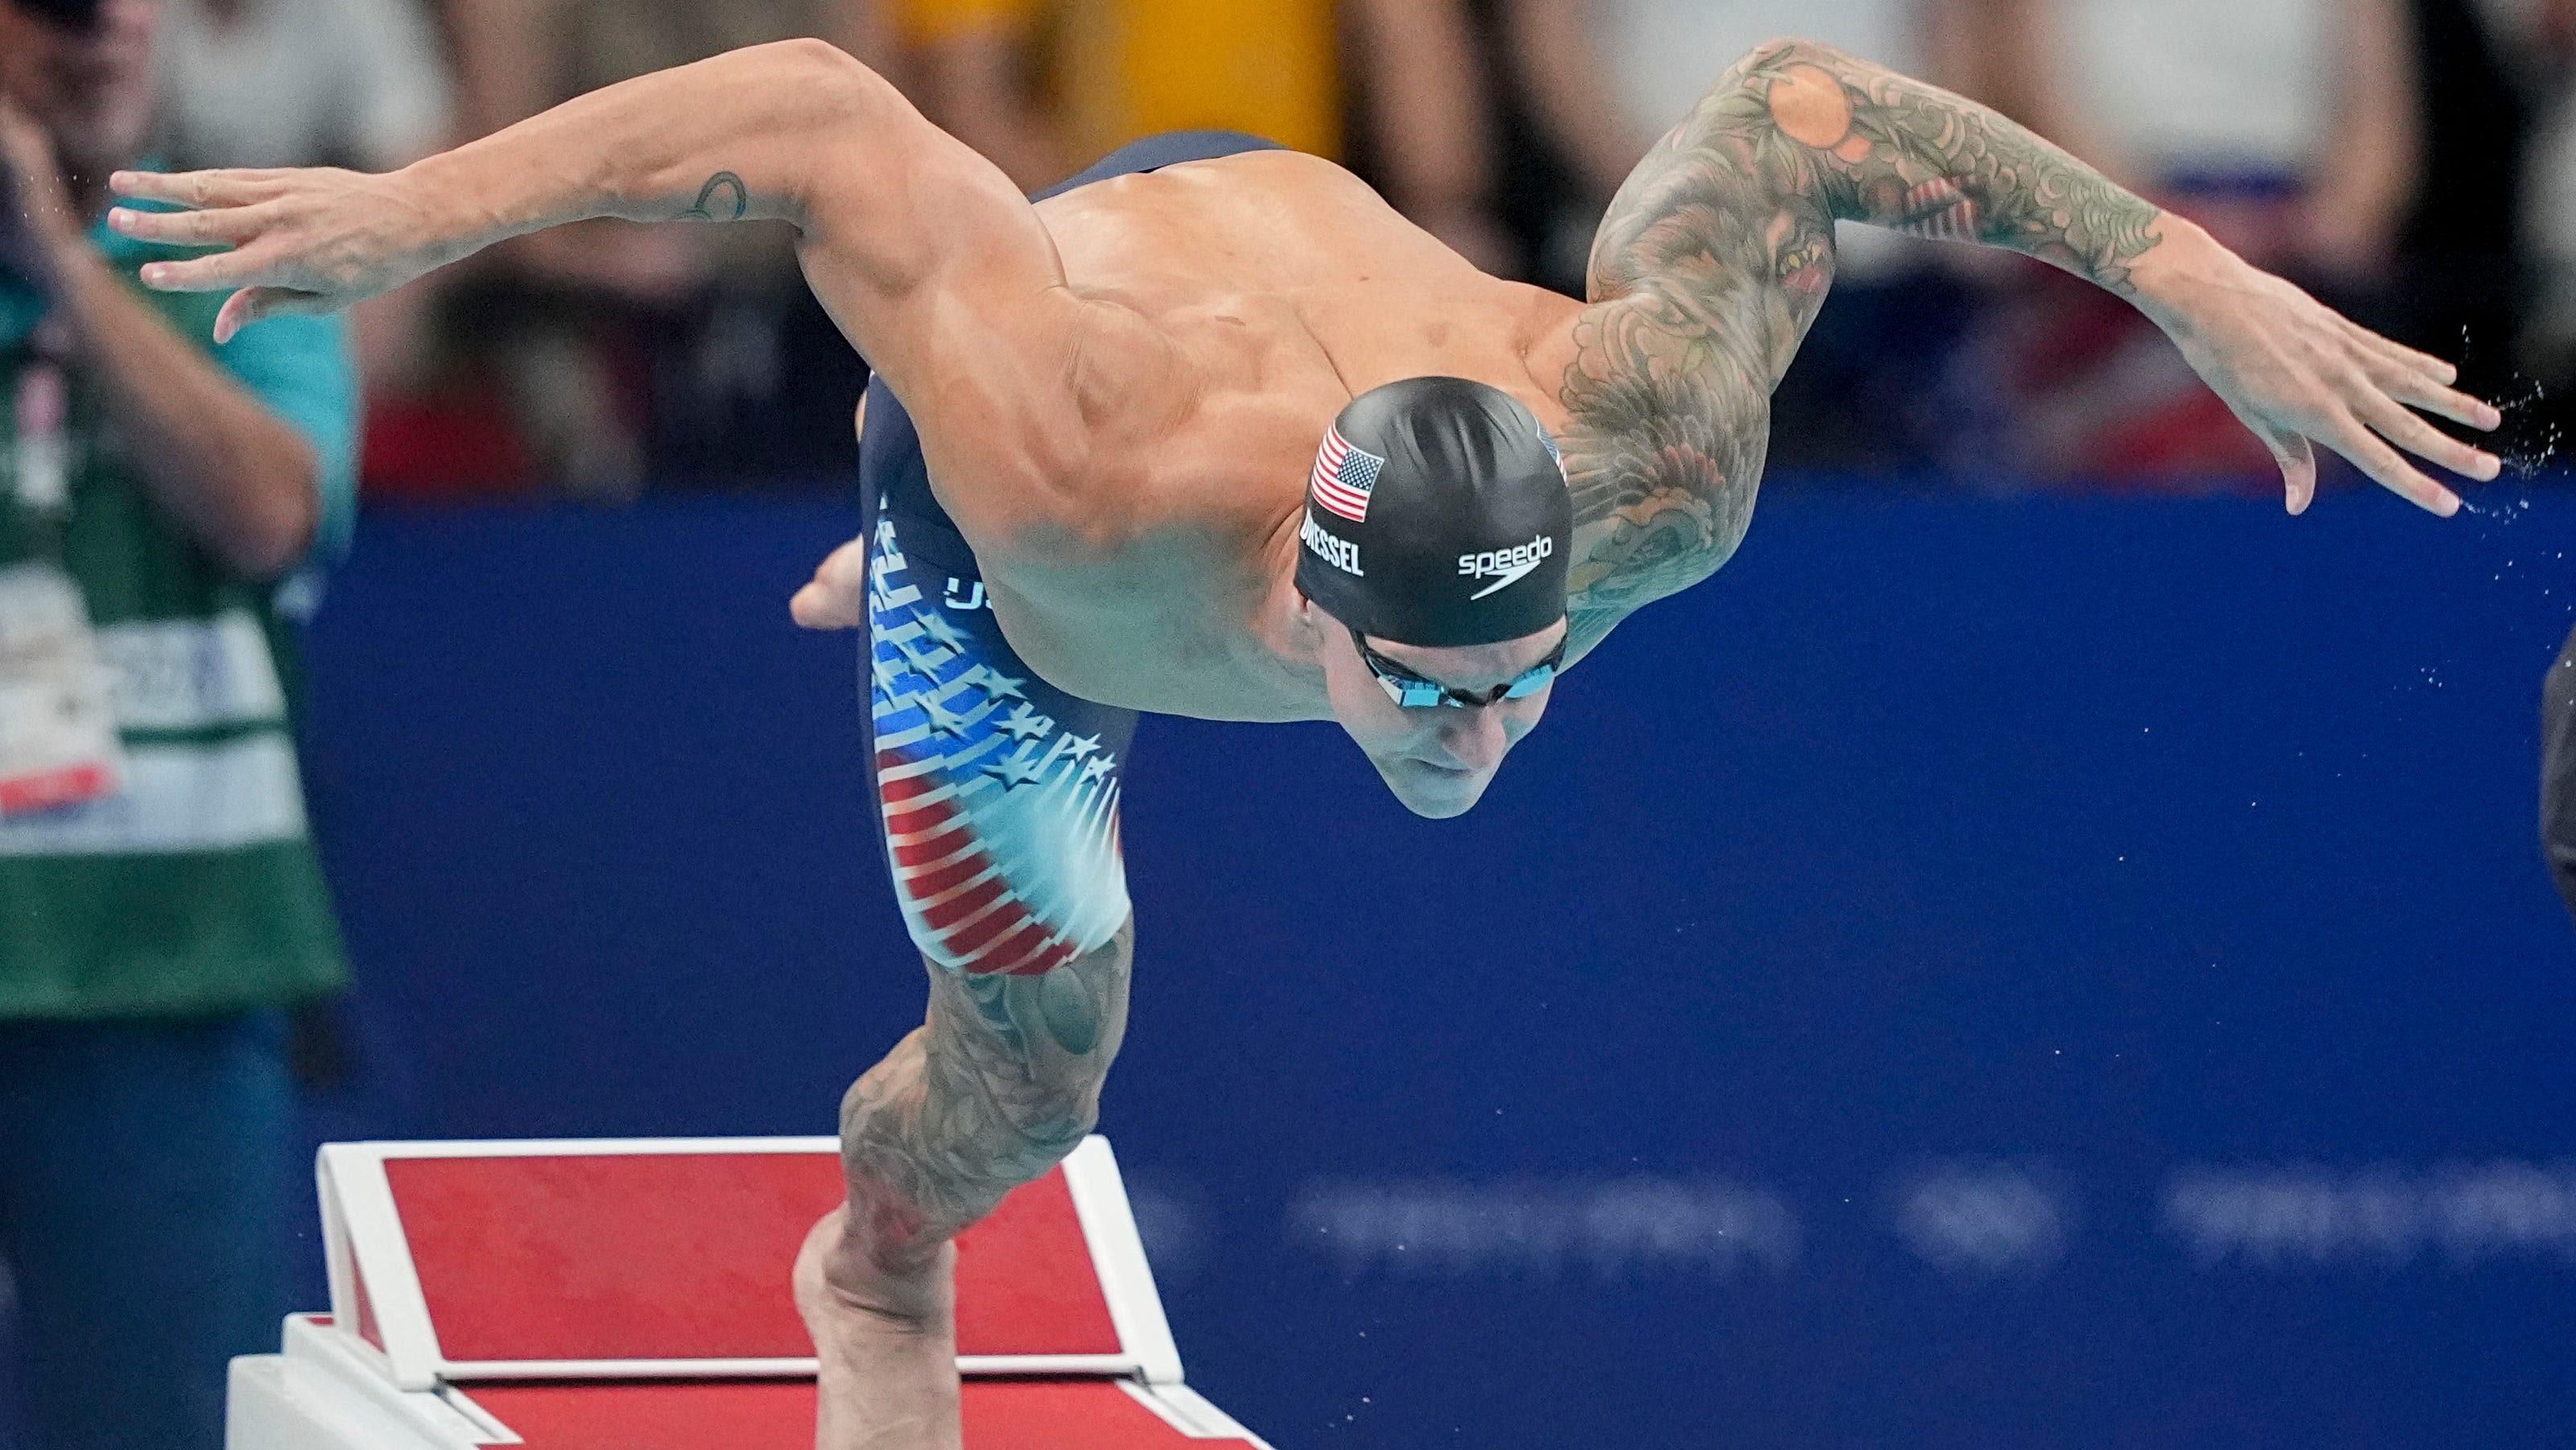 Caeleb Dressel misses medal in 50 free: What's still ahead in his Olympic swimming quest?